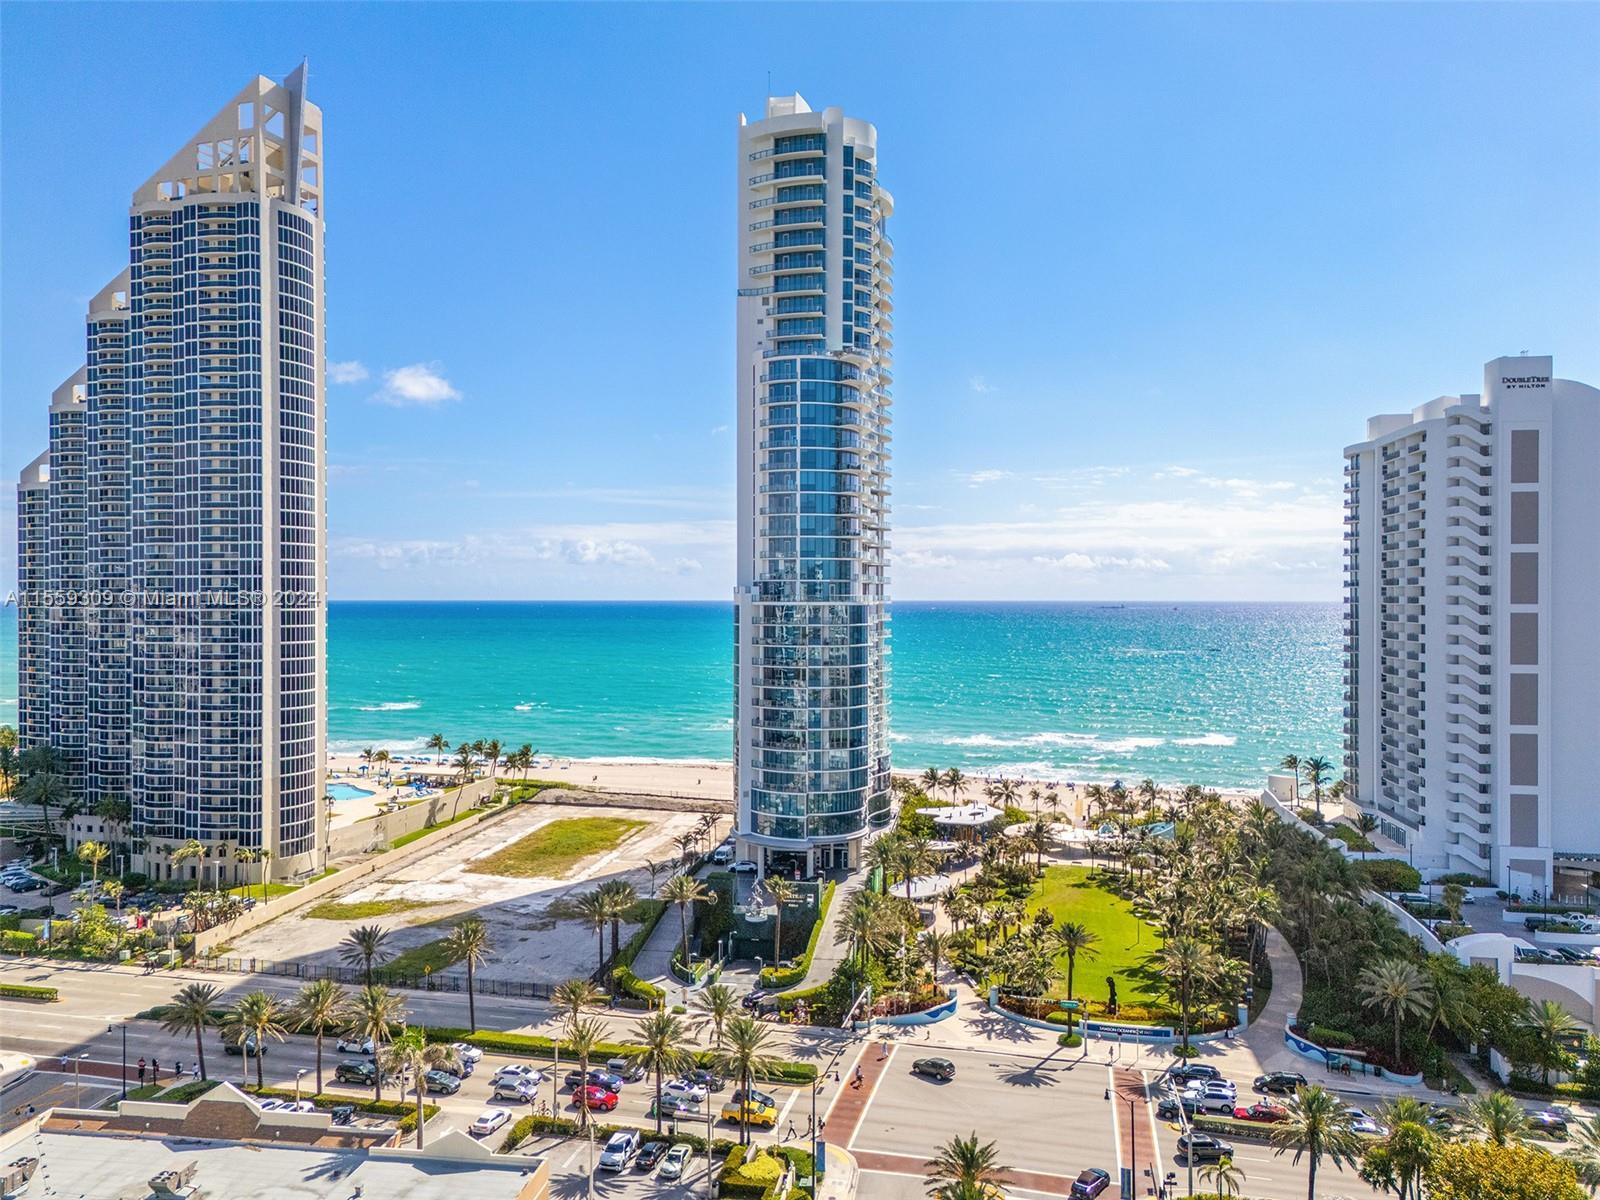 Photo of 17475 Collins Ave #804 in Sunny Isles Beach, FL